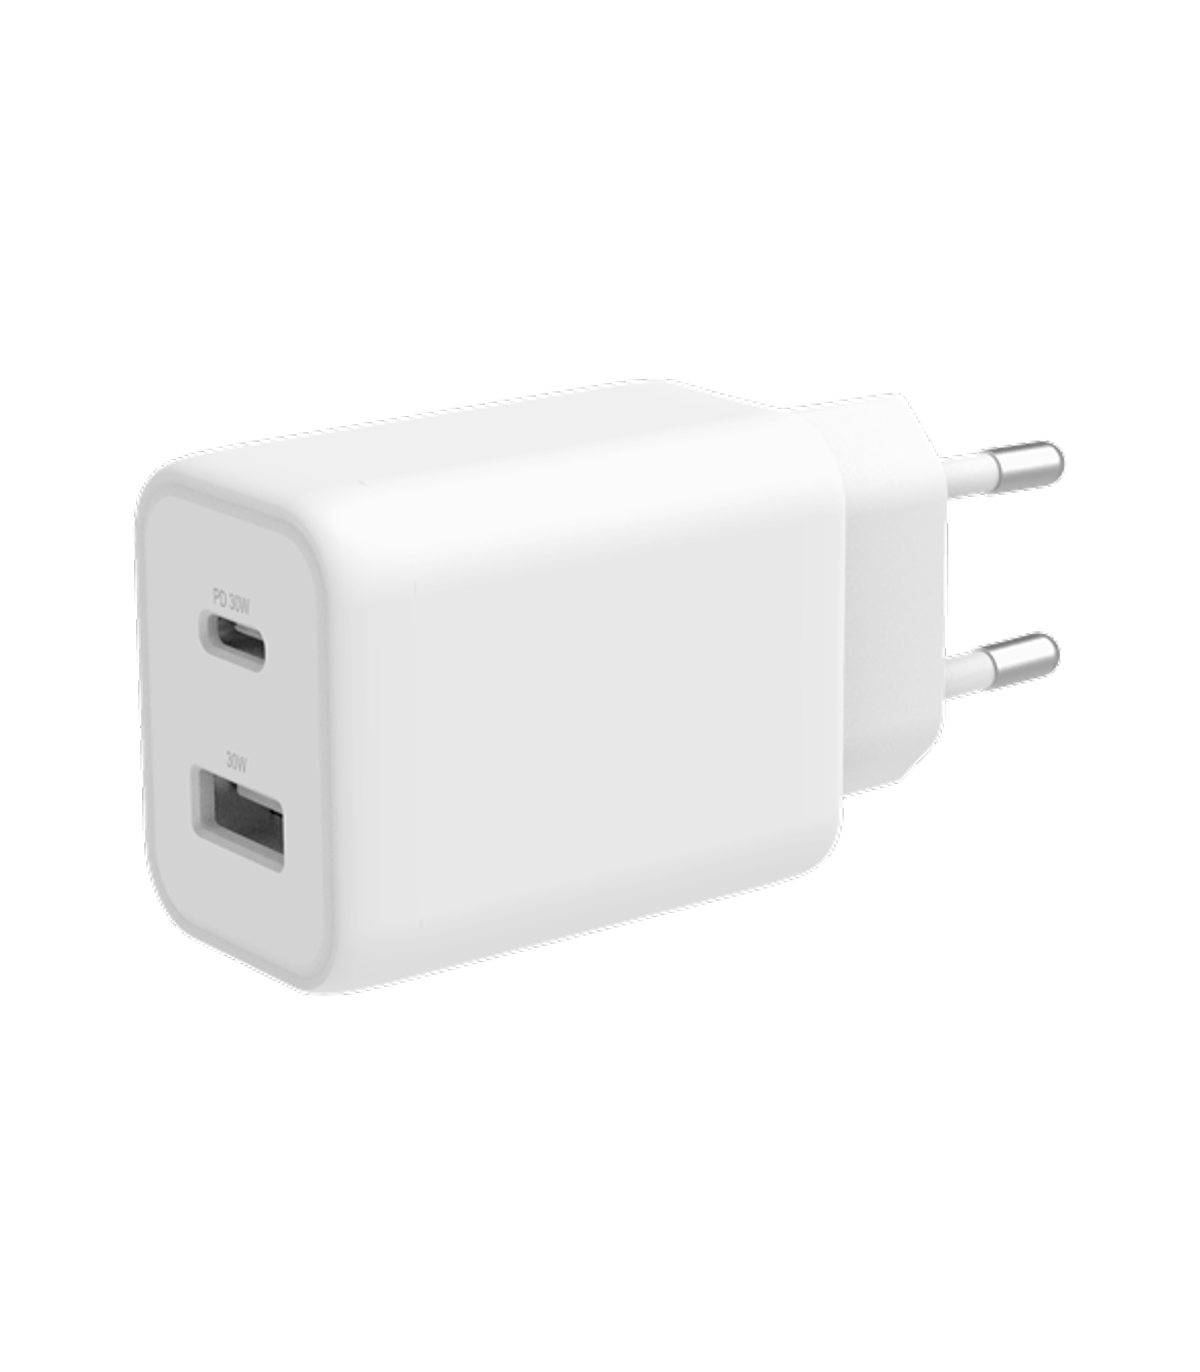 Deltaco 2-port 33W USB Charger with USB-A + USB-C PD ports, PPS, CE/EU